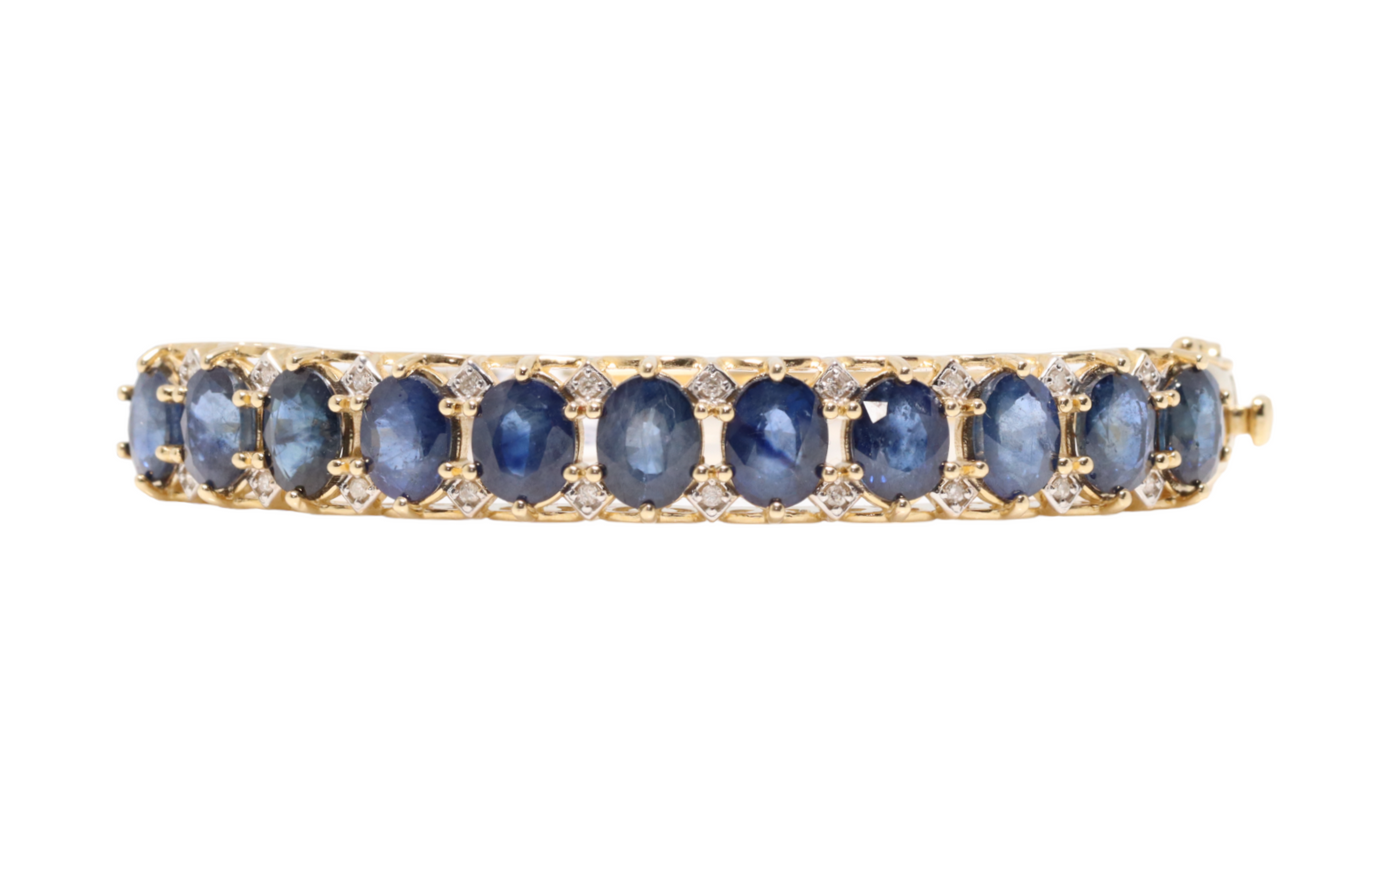 Sapphire and Diamond Bangle in 14k yellow gold